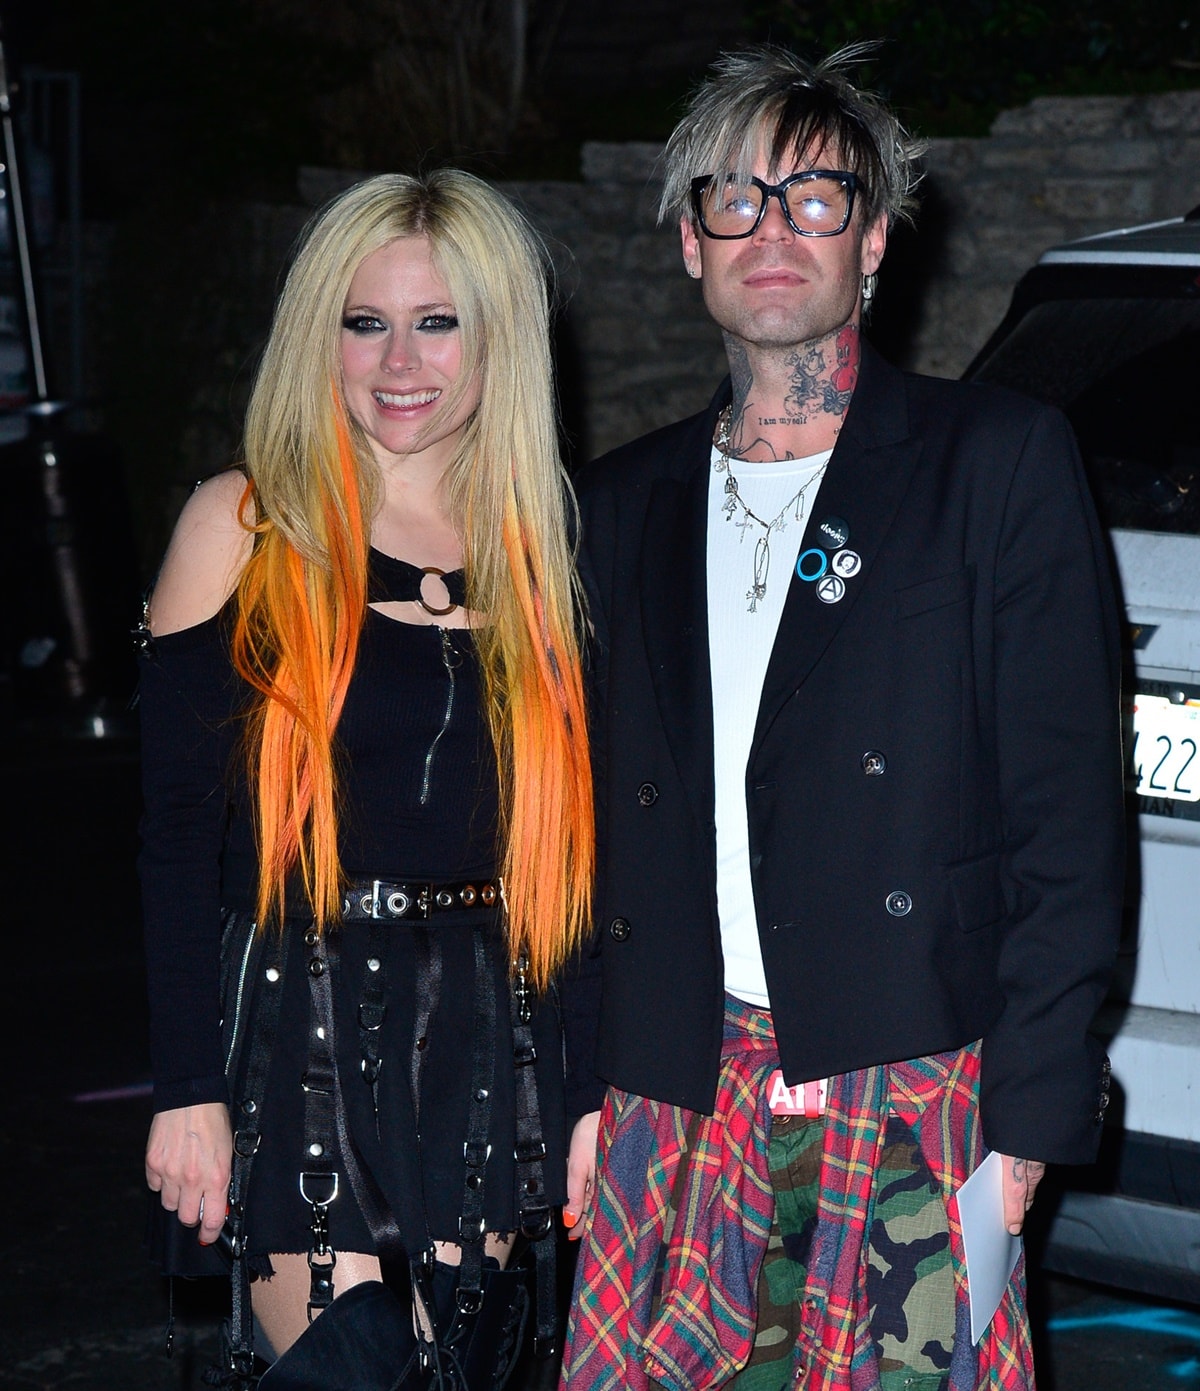 Avril Lavigne and Mod Sun first met during a songwriting session shortly after she had ended a previous relationship